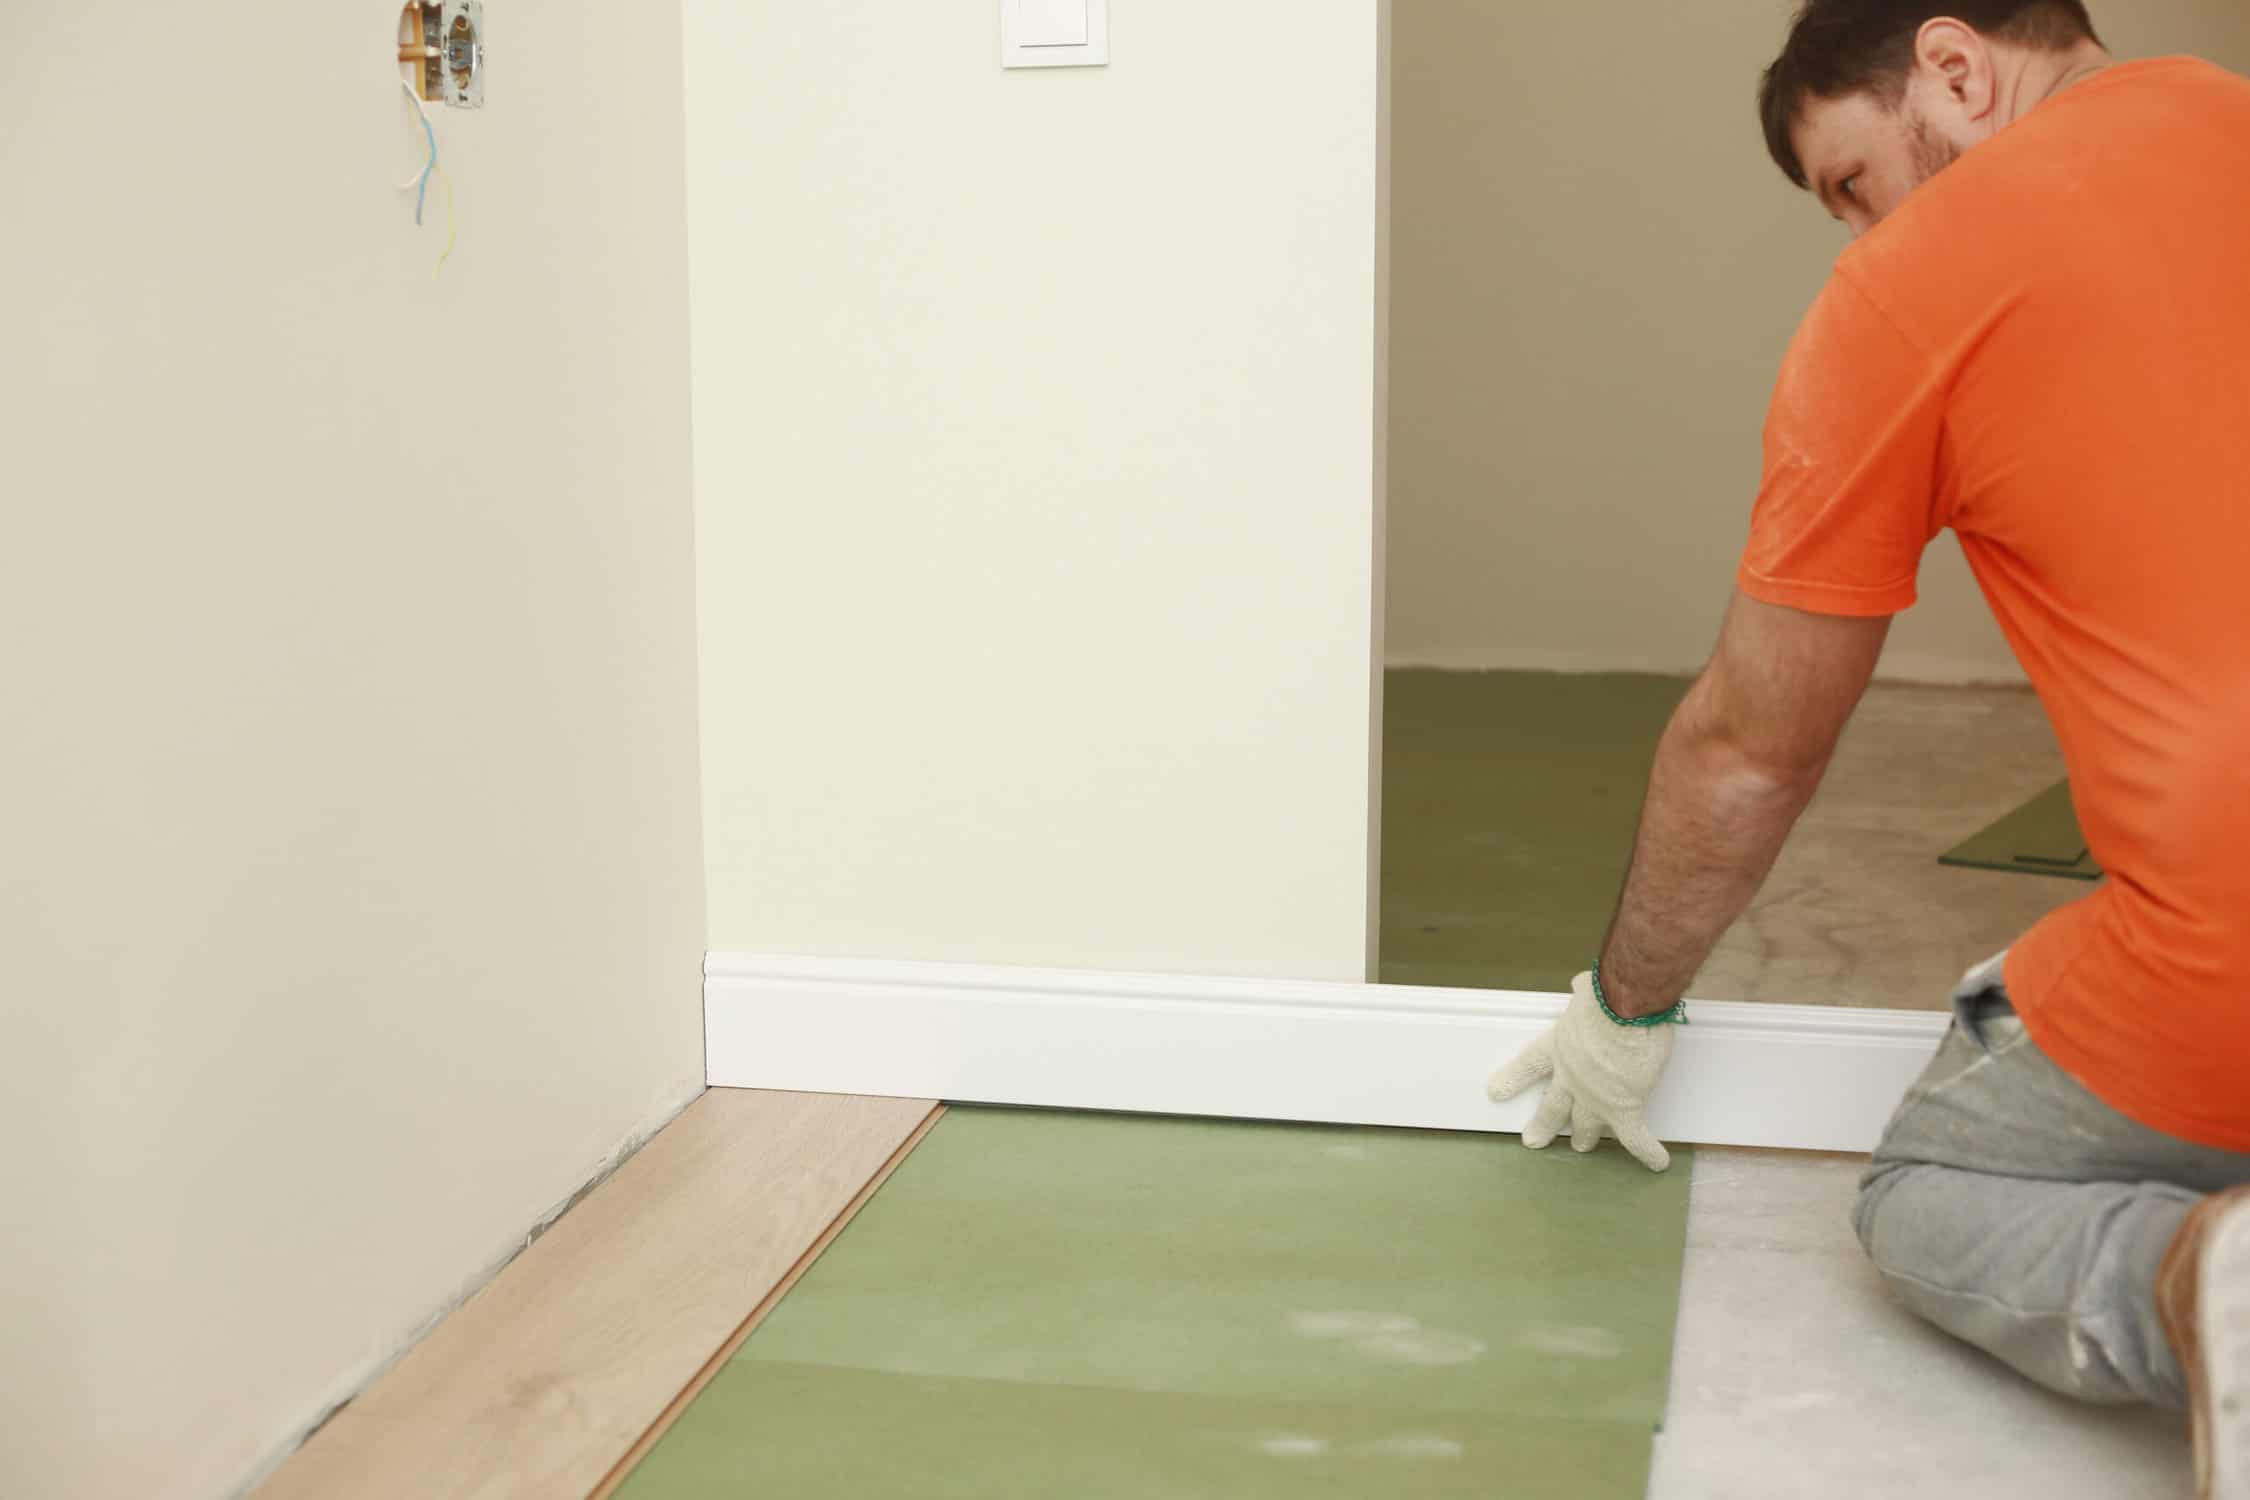 the worker installs plinths in the apartment. Installing a white plastic skirting board on a laminate - adjusting and trimming